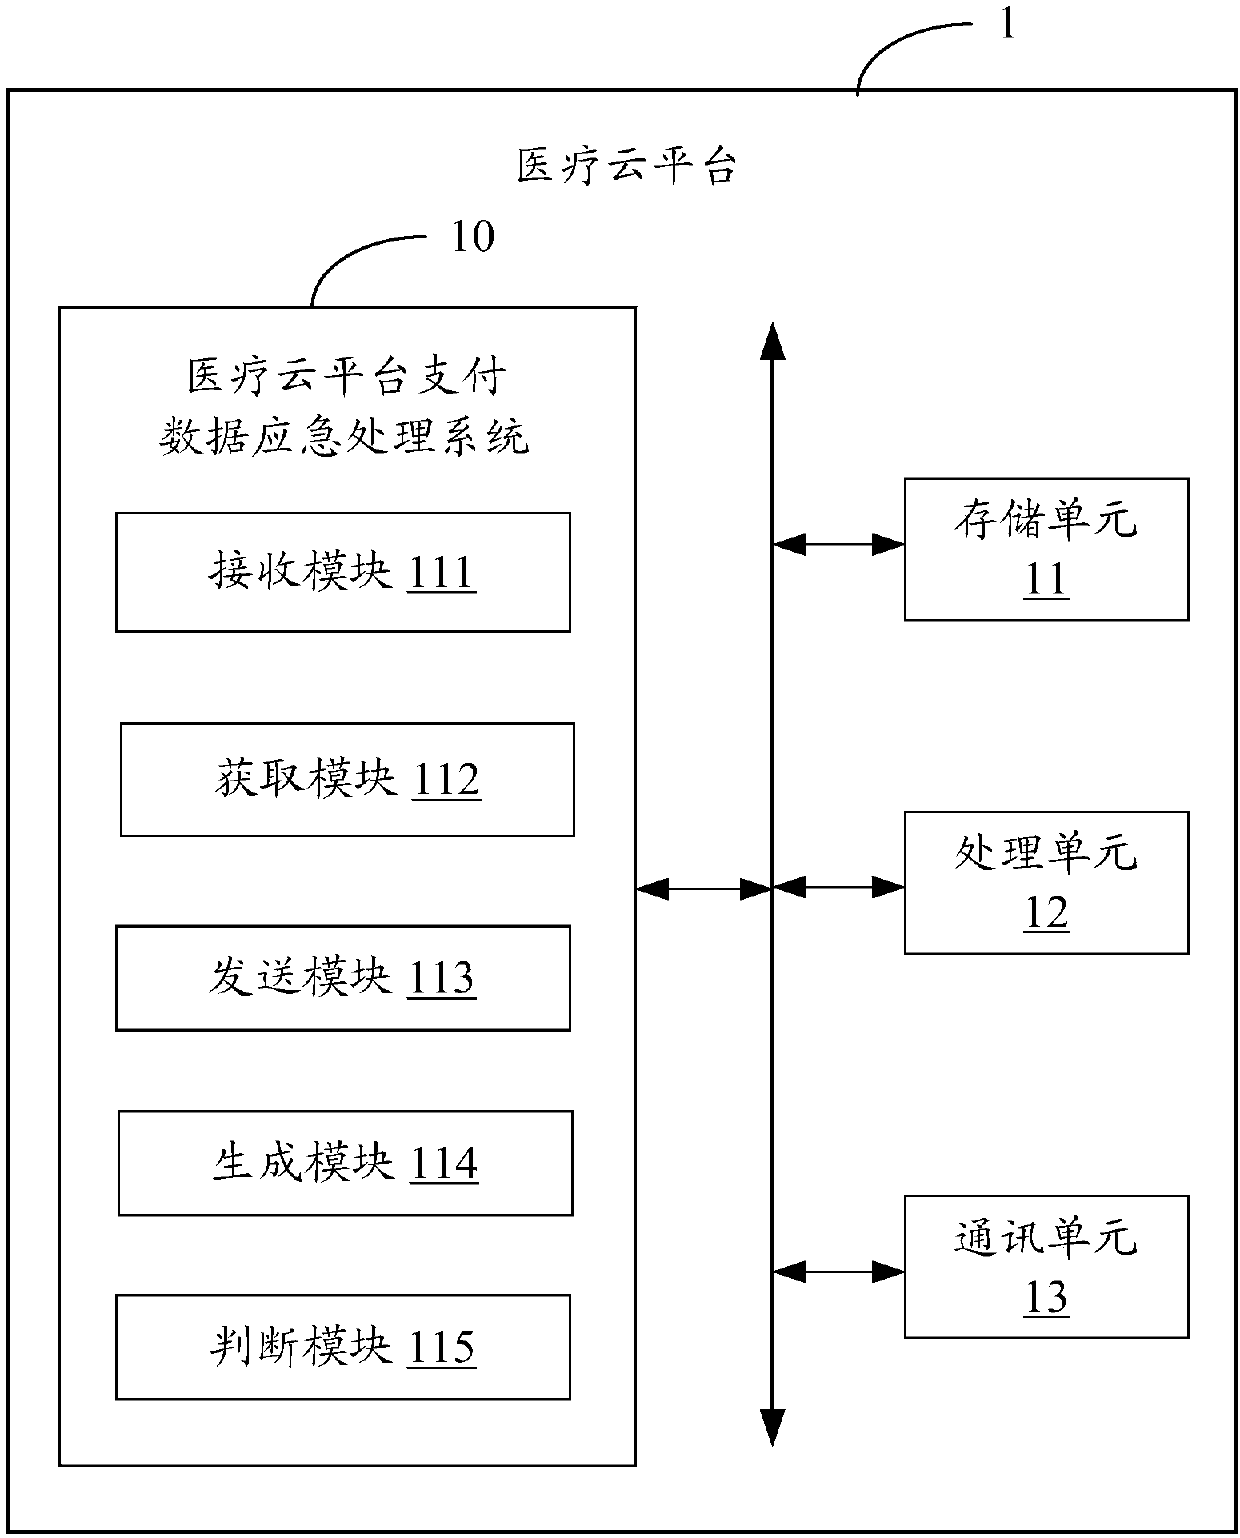 Medical cloud platform payment data emergency treatment system and method